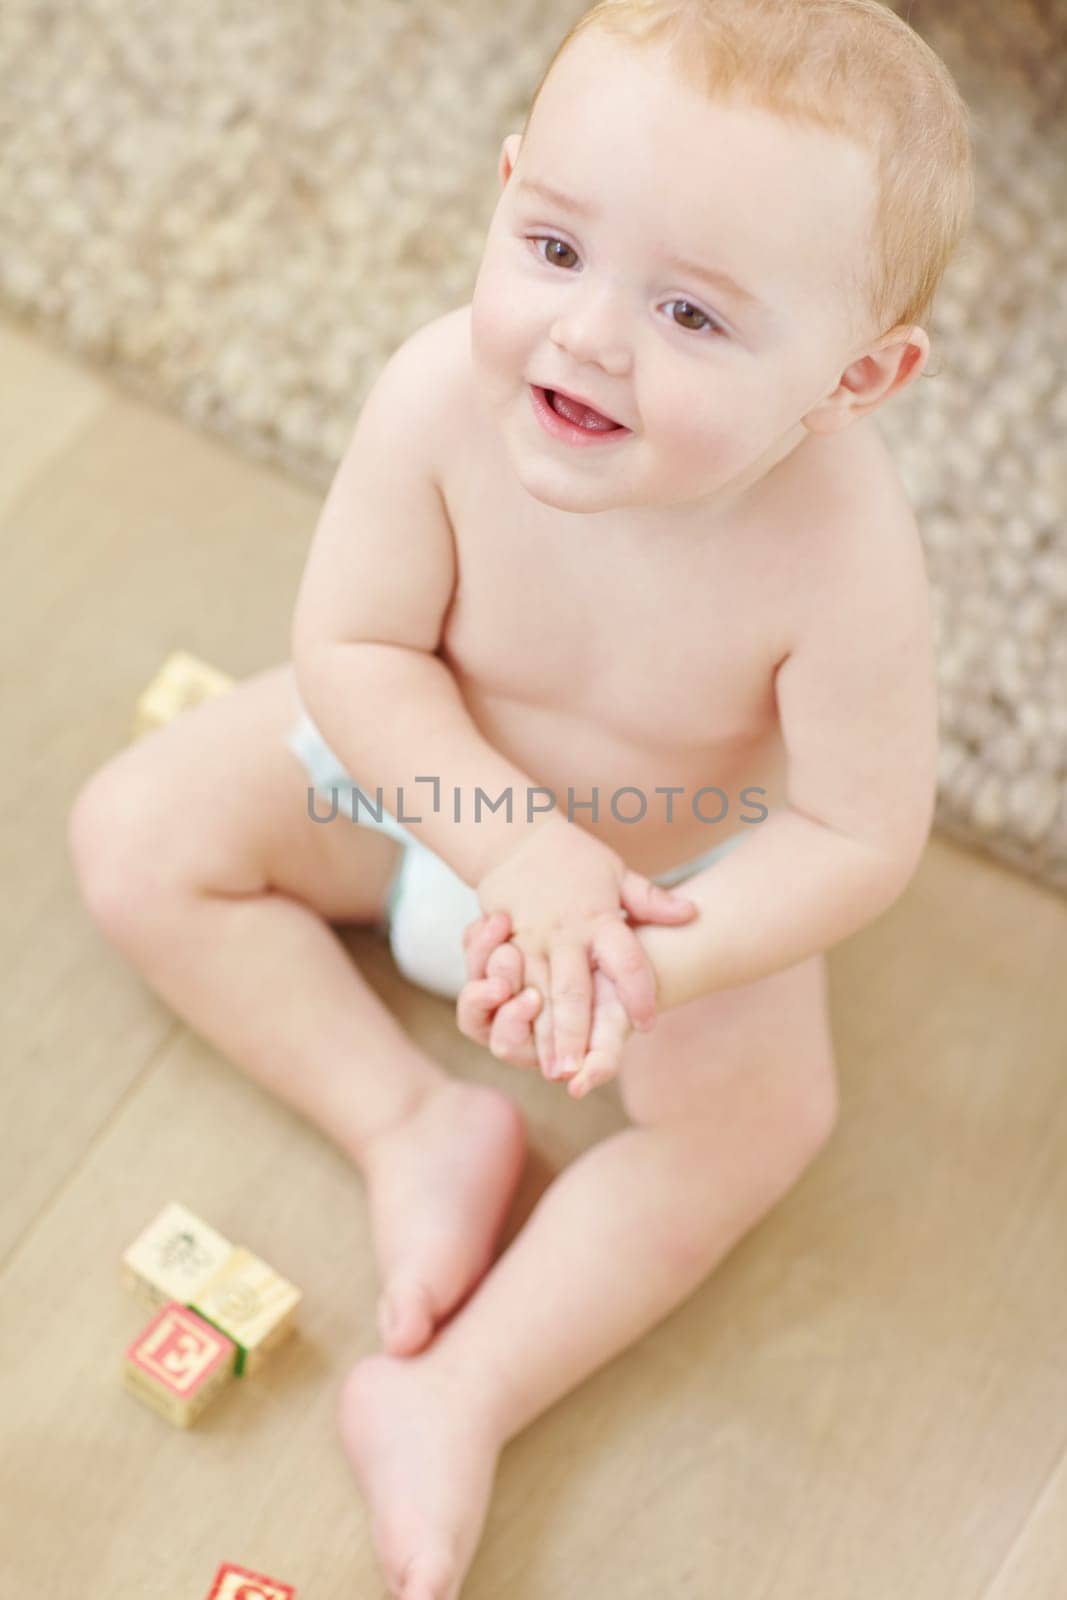 If you sexy and you know it, clap your hands. A cute little boy clapping his hands with his blocks lying next to him